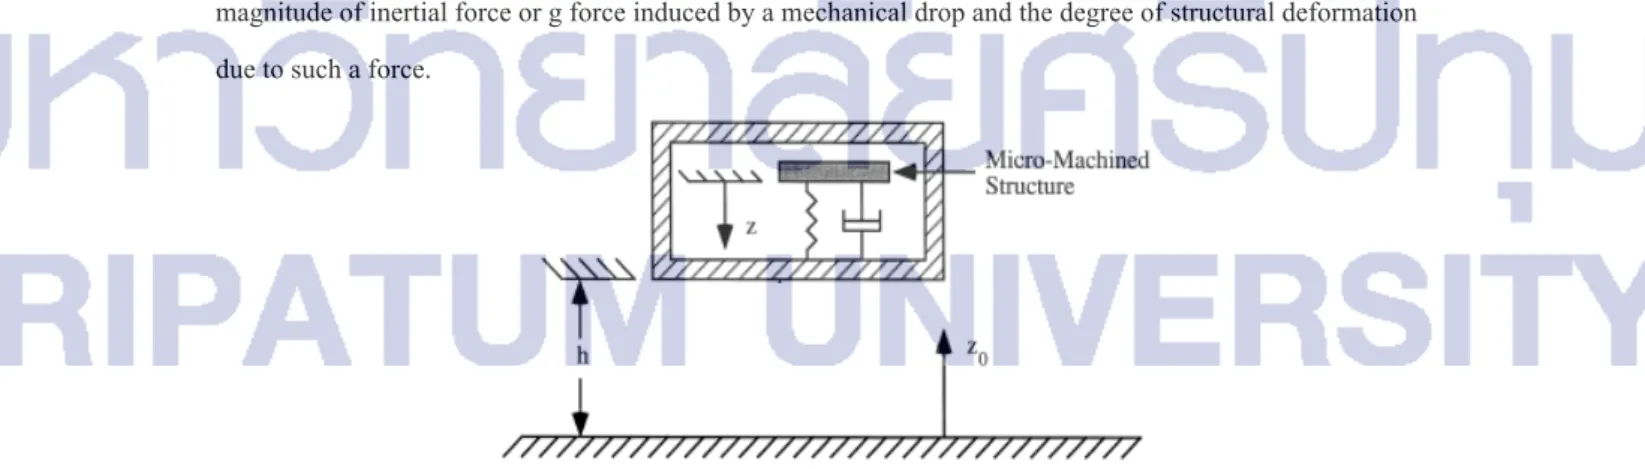 Figure 2. A drop test schematic of a micromachined system. 